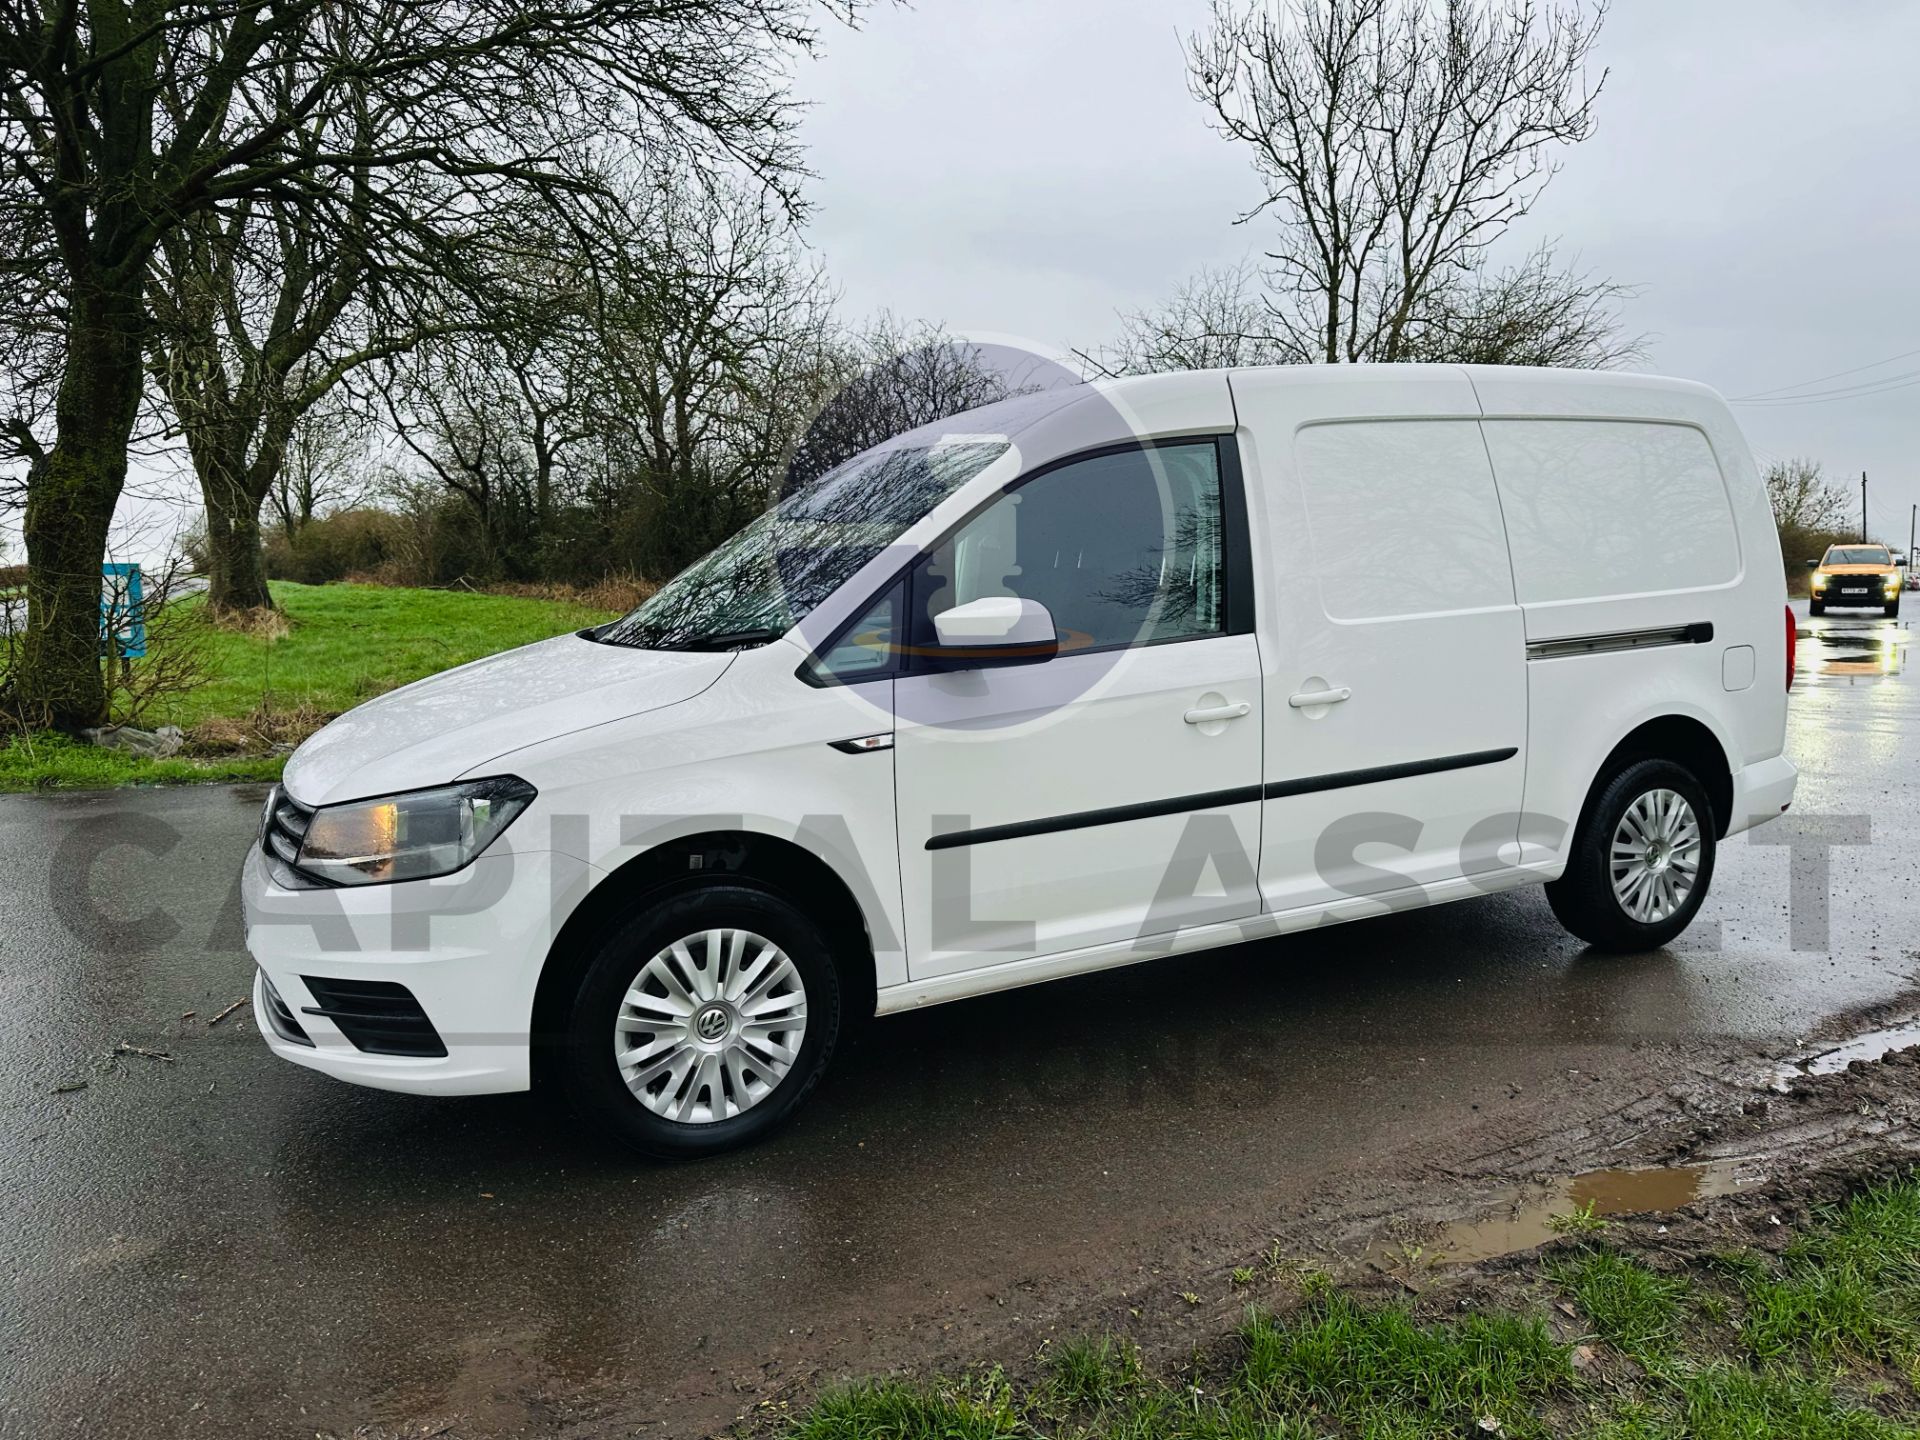 (ON SALE) VOLKSWAGEN CADDY 2.0TDI BMT TREND-LINE (2021 MODEL) MAXI / LWB-1 OWNER (AIR CON) EURO 6 - Image 5 of 29